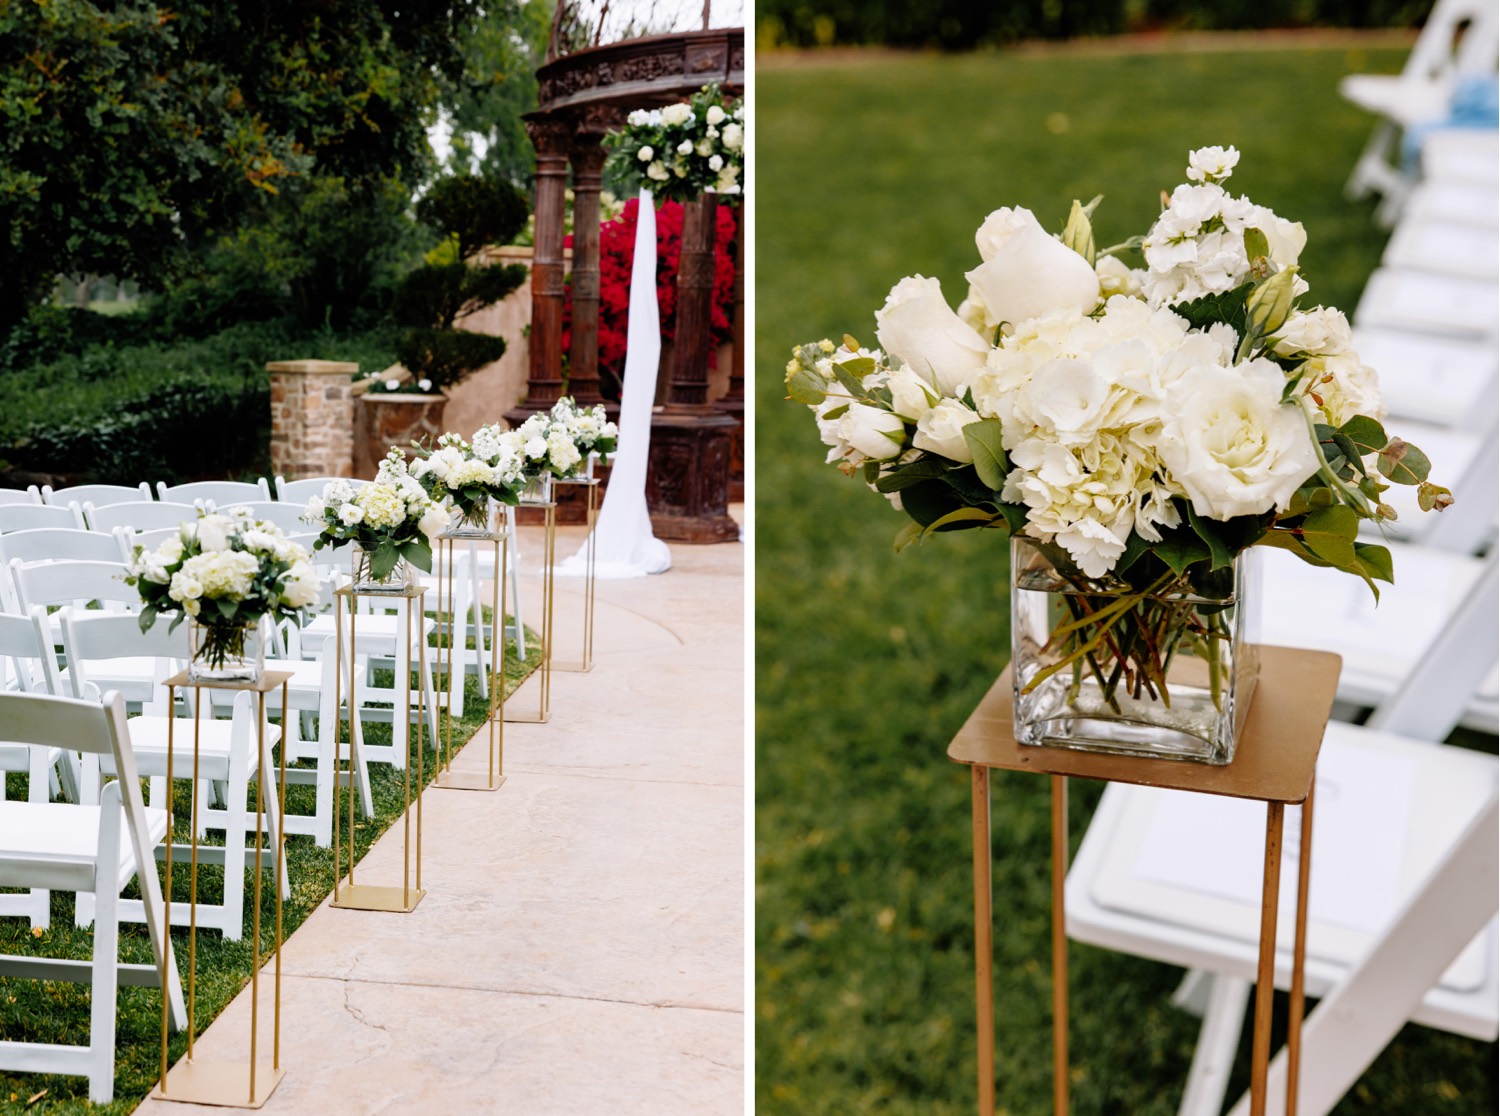 Westlake Village Inn Wedding photographed by Magaly Barajas Photography